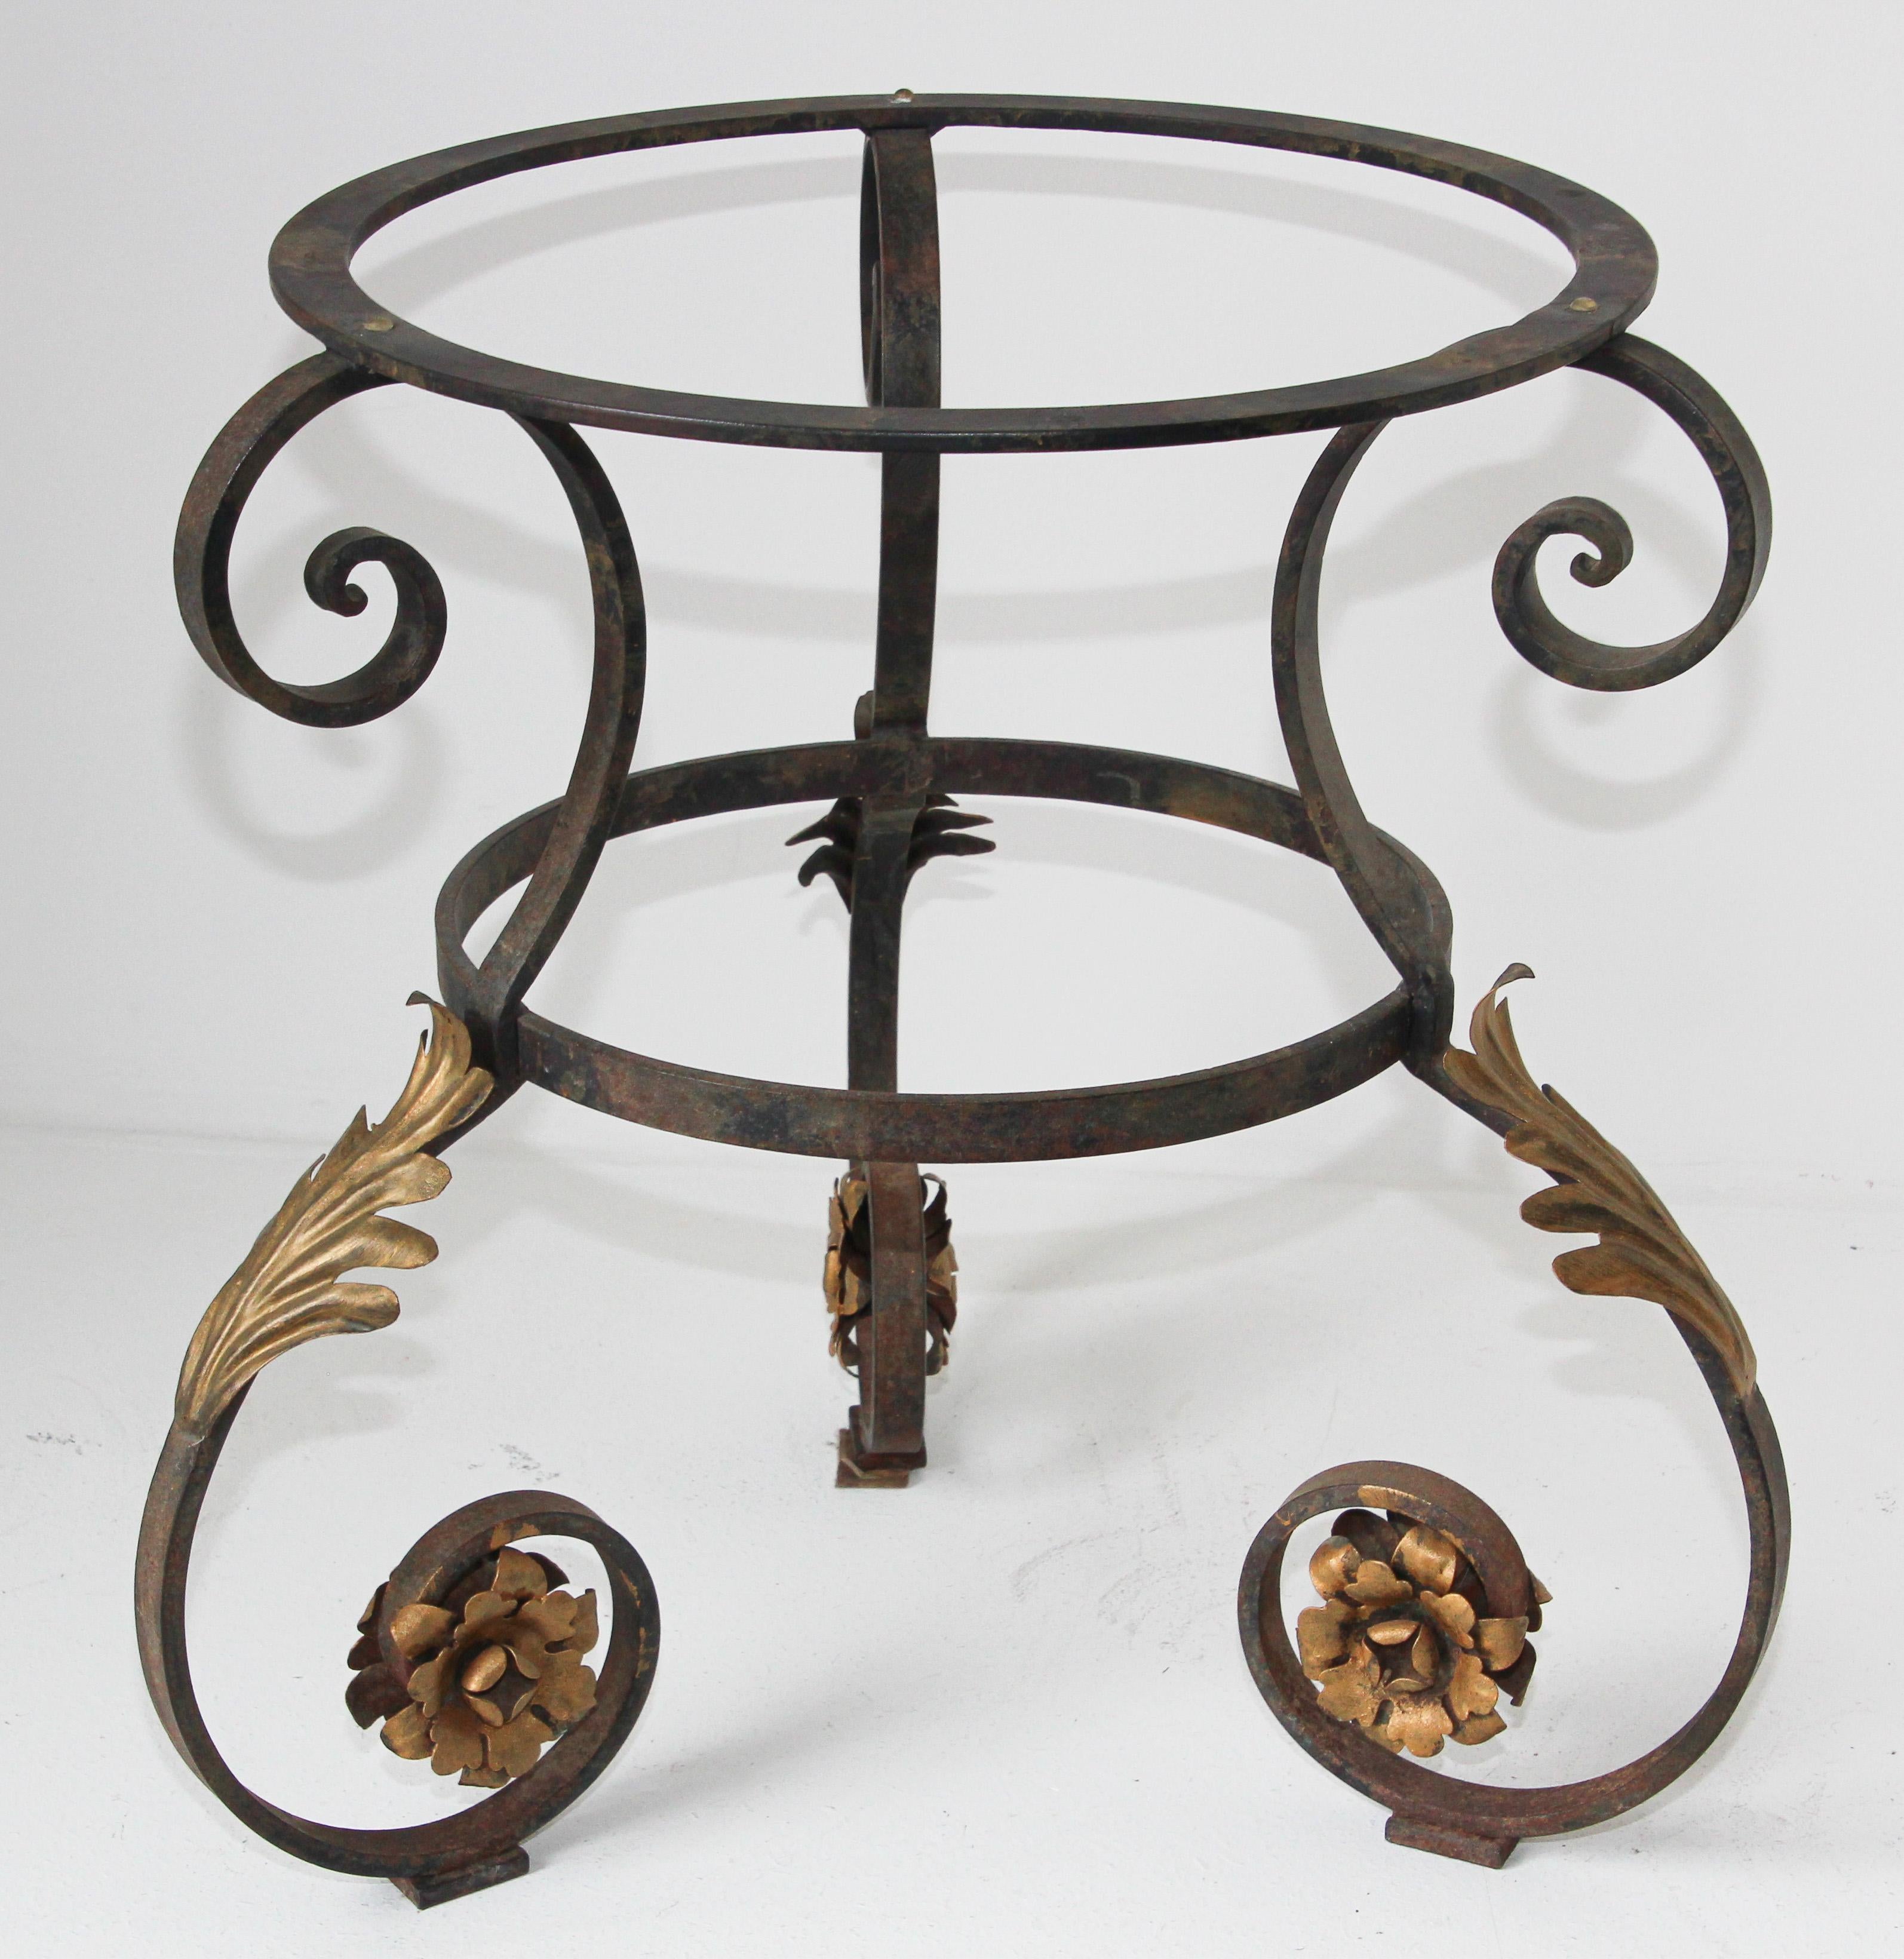 Hand forged Italian Art Nouveau style glass top table with iron frame and gilt metal flowers.
Hand forged Italian Art Nouveau style glass top table with iron frame and gilt metal flowers. Circa 1930s Italian round glass top table has a curvy iron